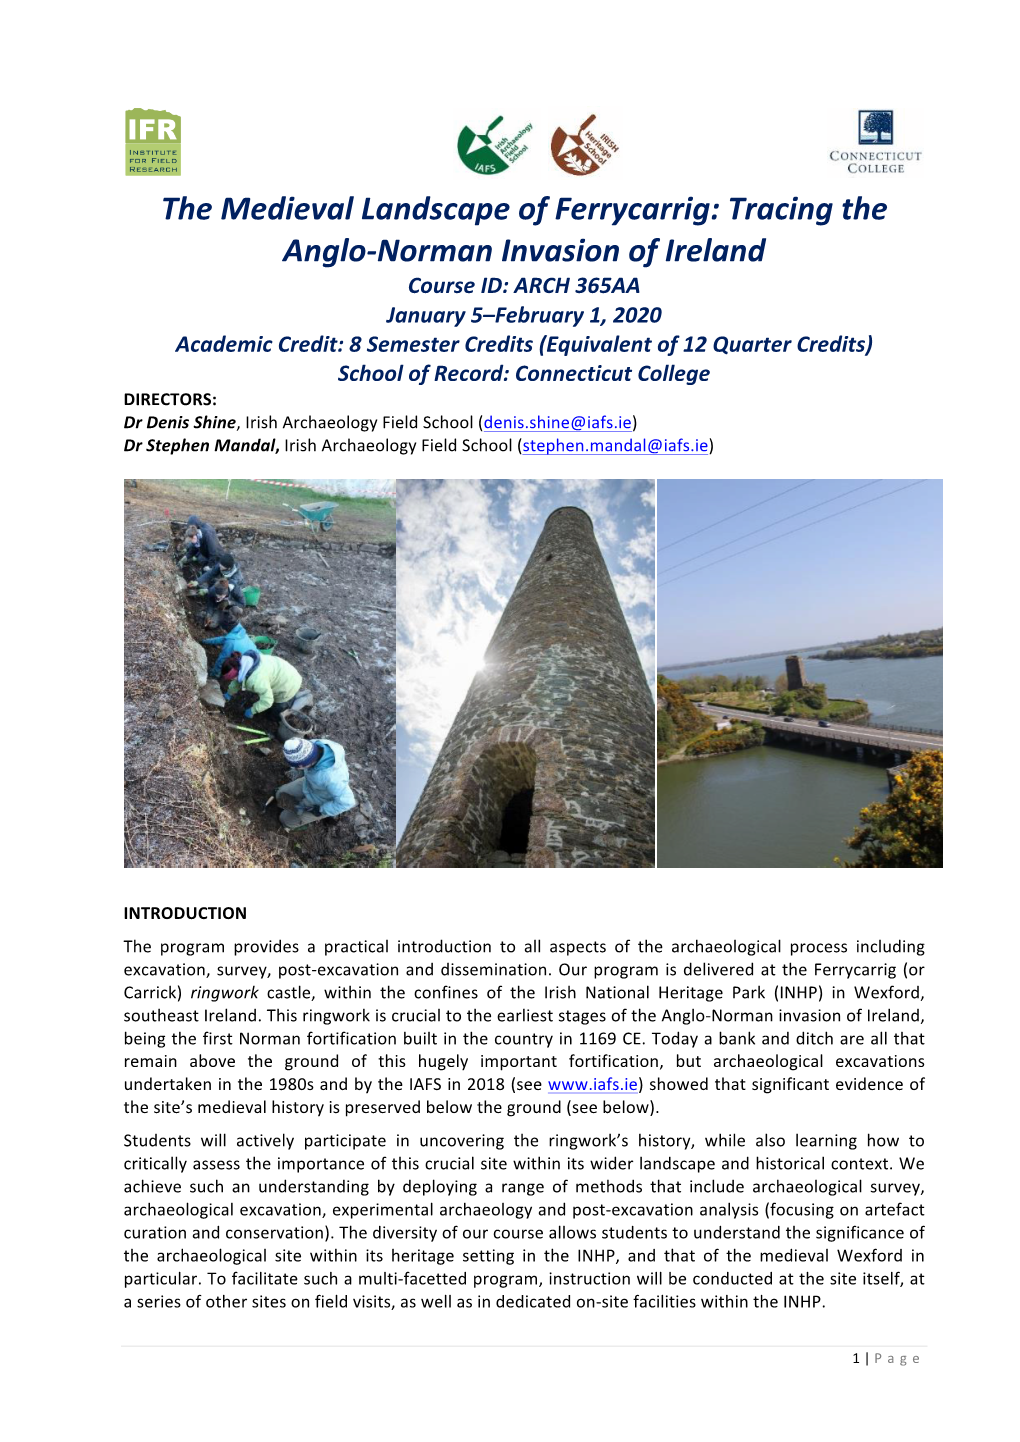 The Medieval Landscape of Ferrycarrig: Tracing the Anglo